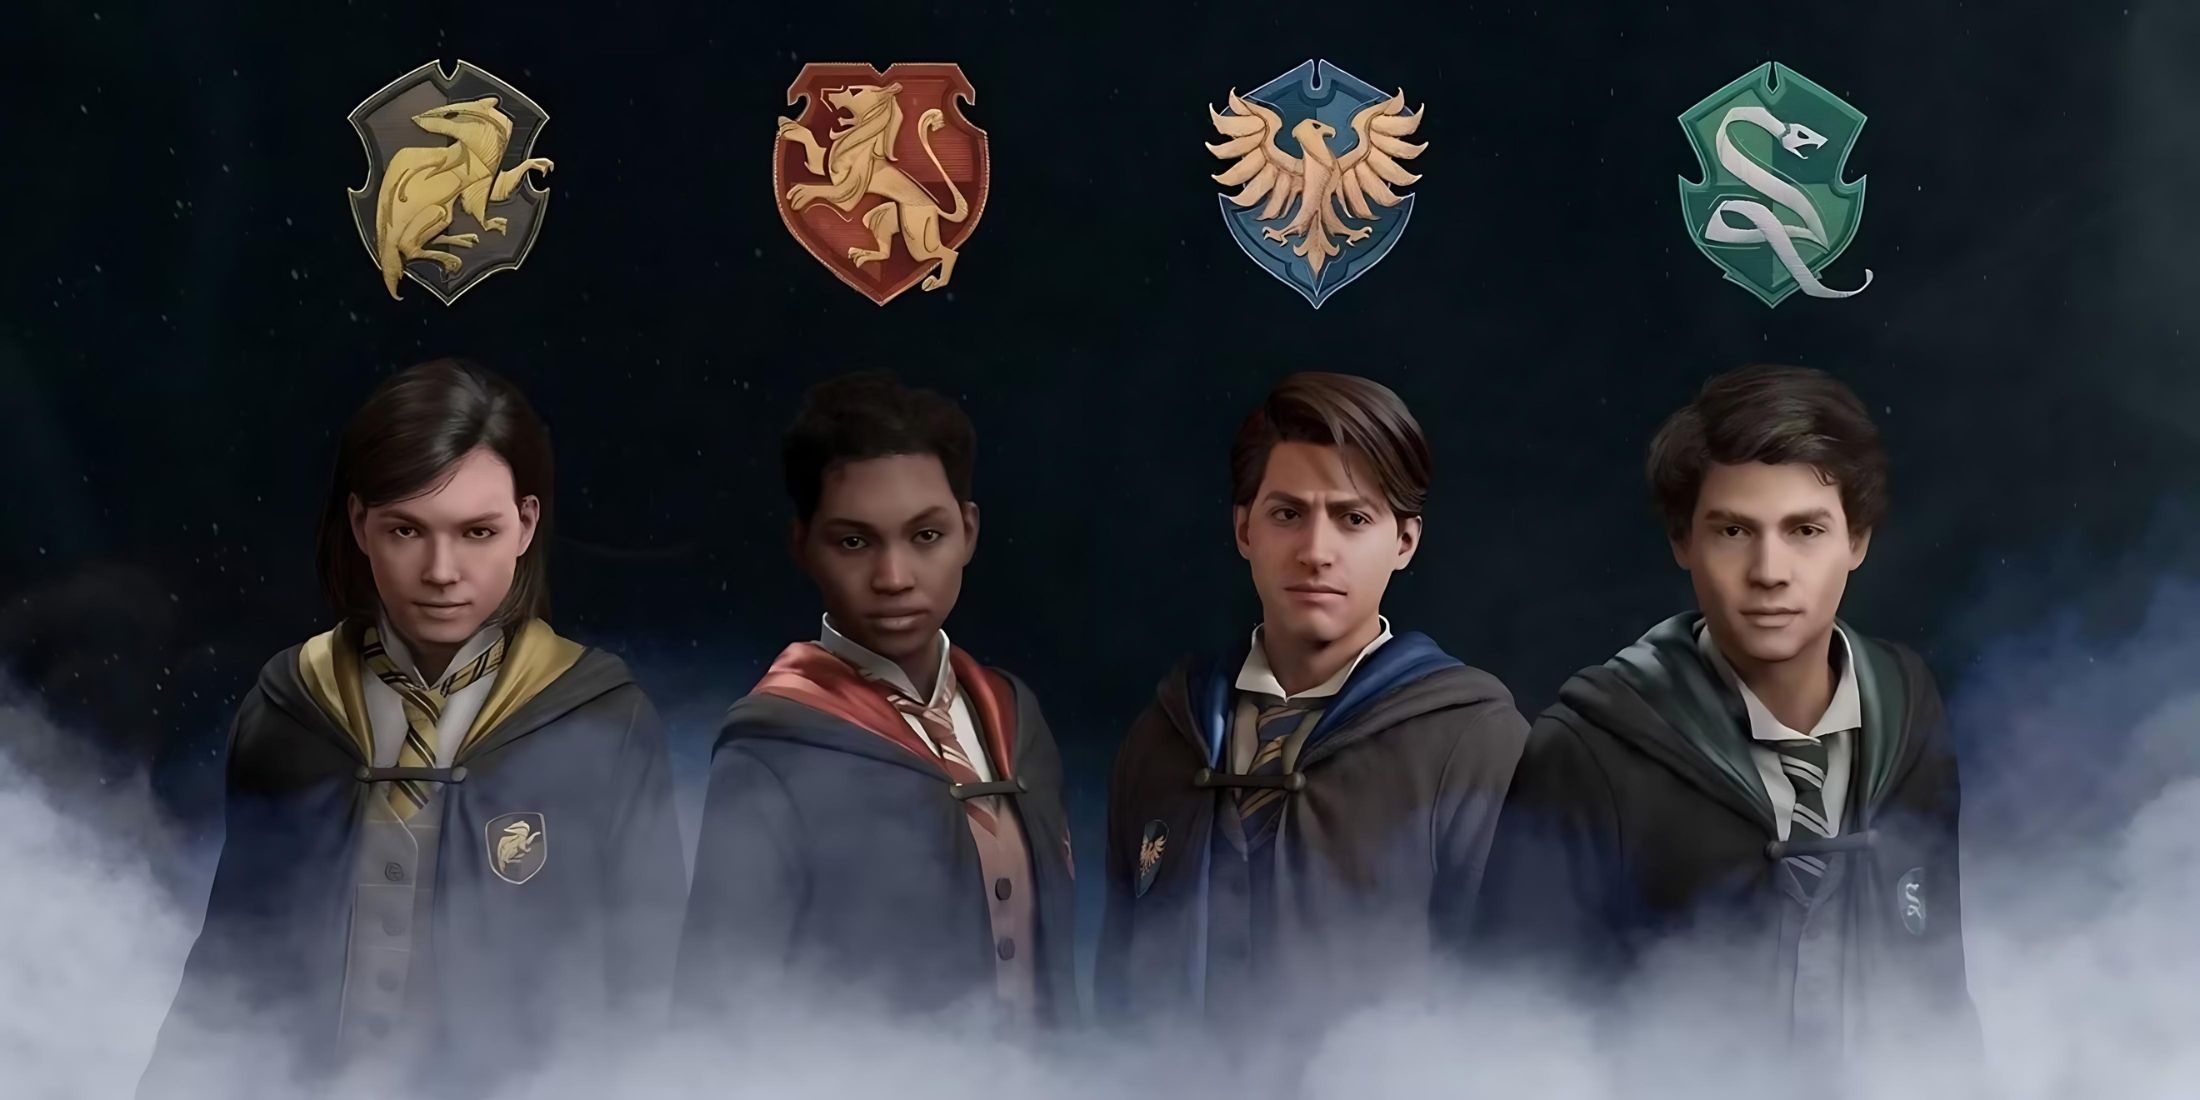 The four Hogwarts Houses with characters of each house from Hogwarts Legacy